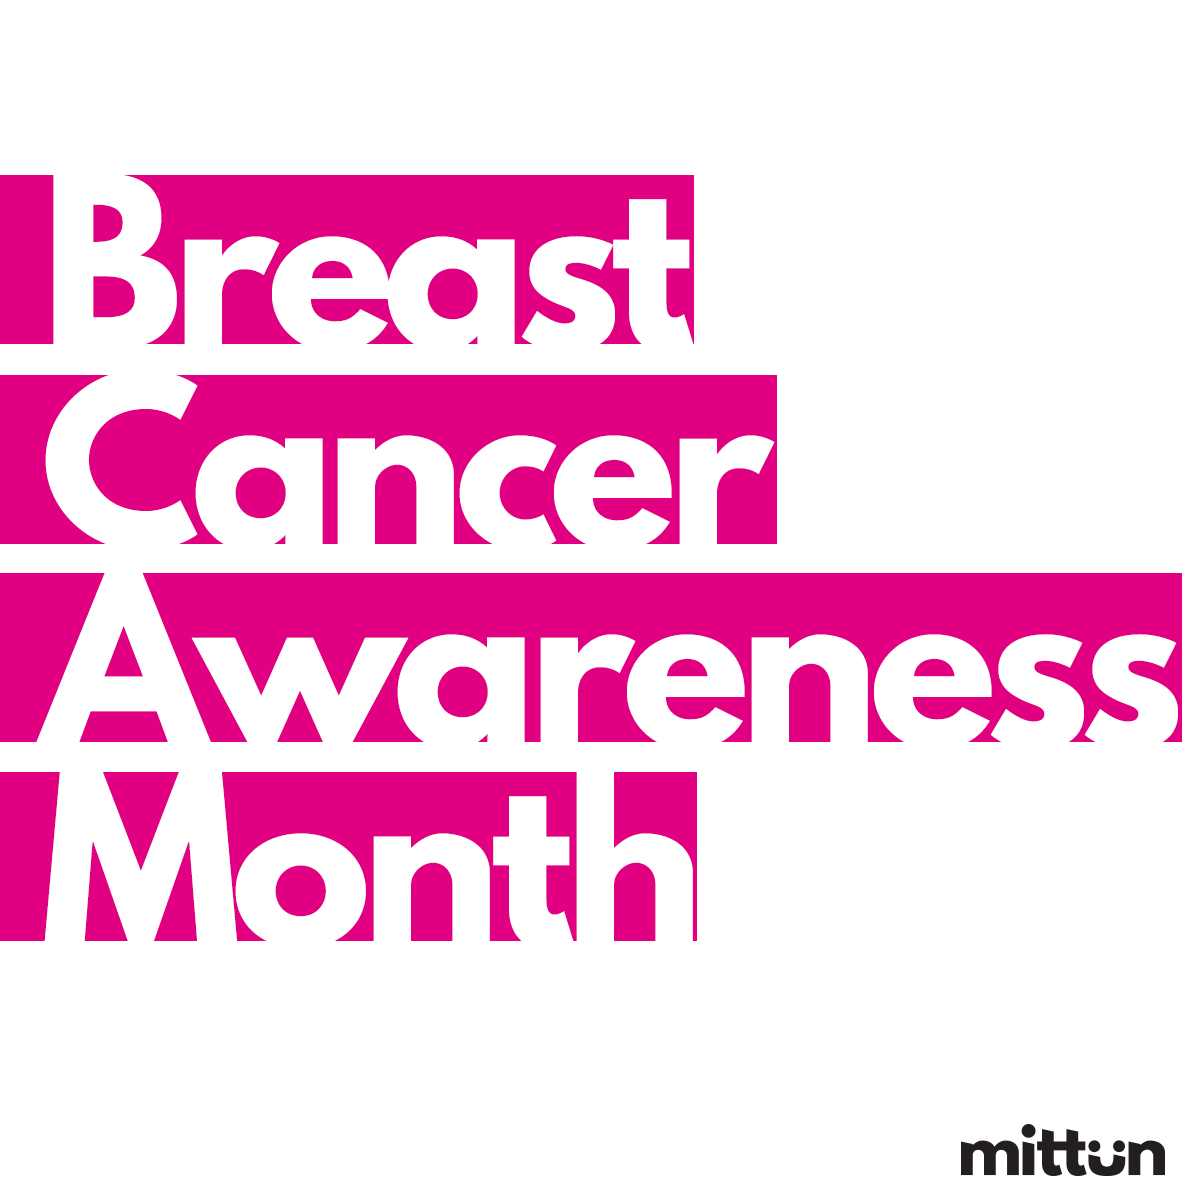 Breast cancer awareness month graphic - by mittun